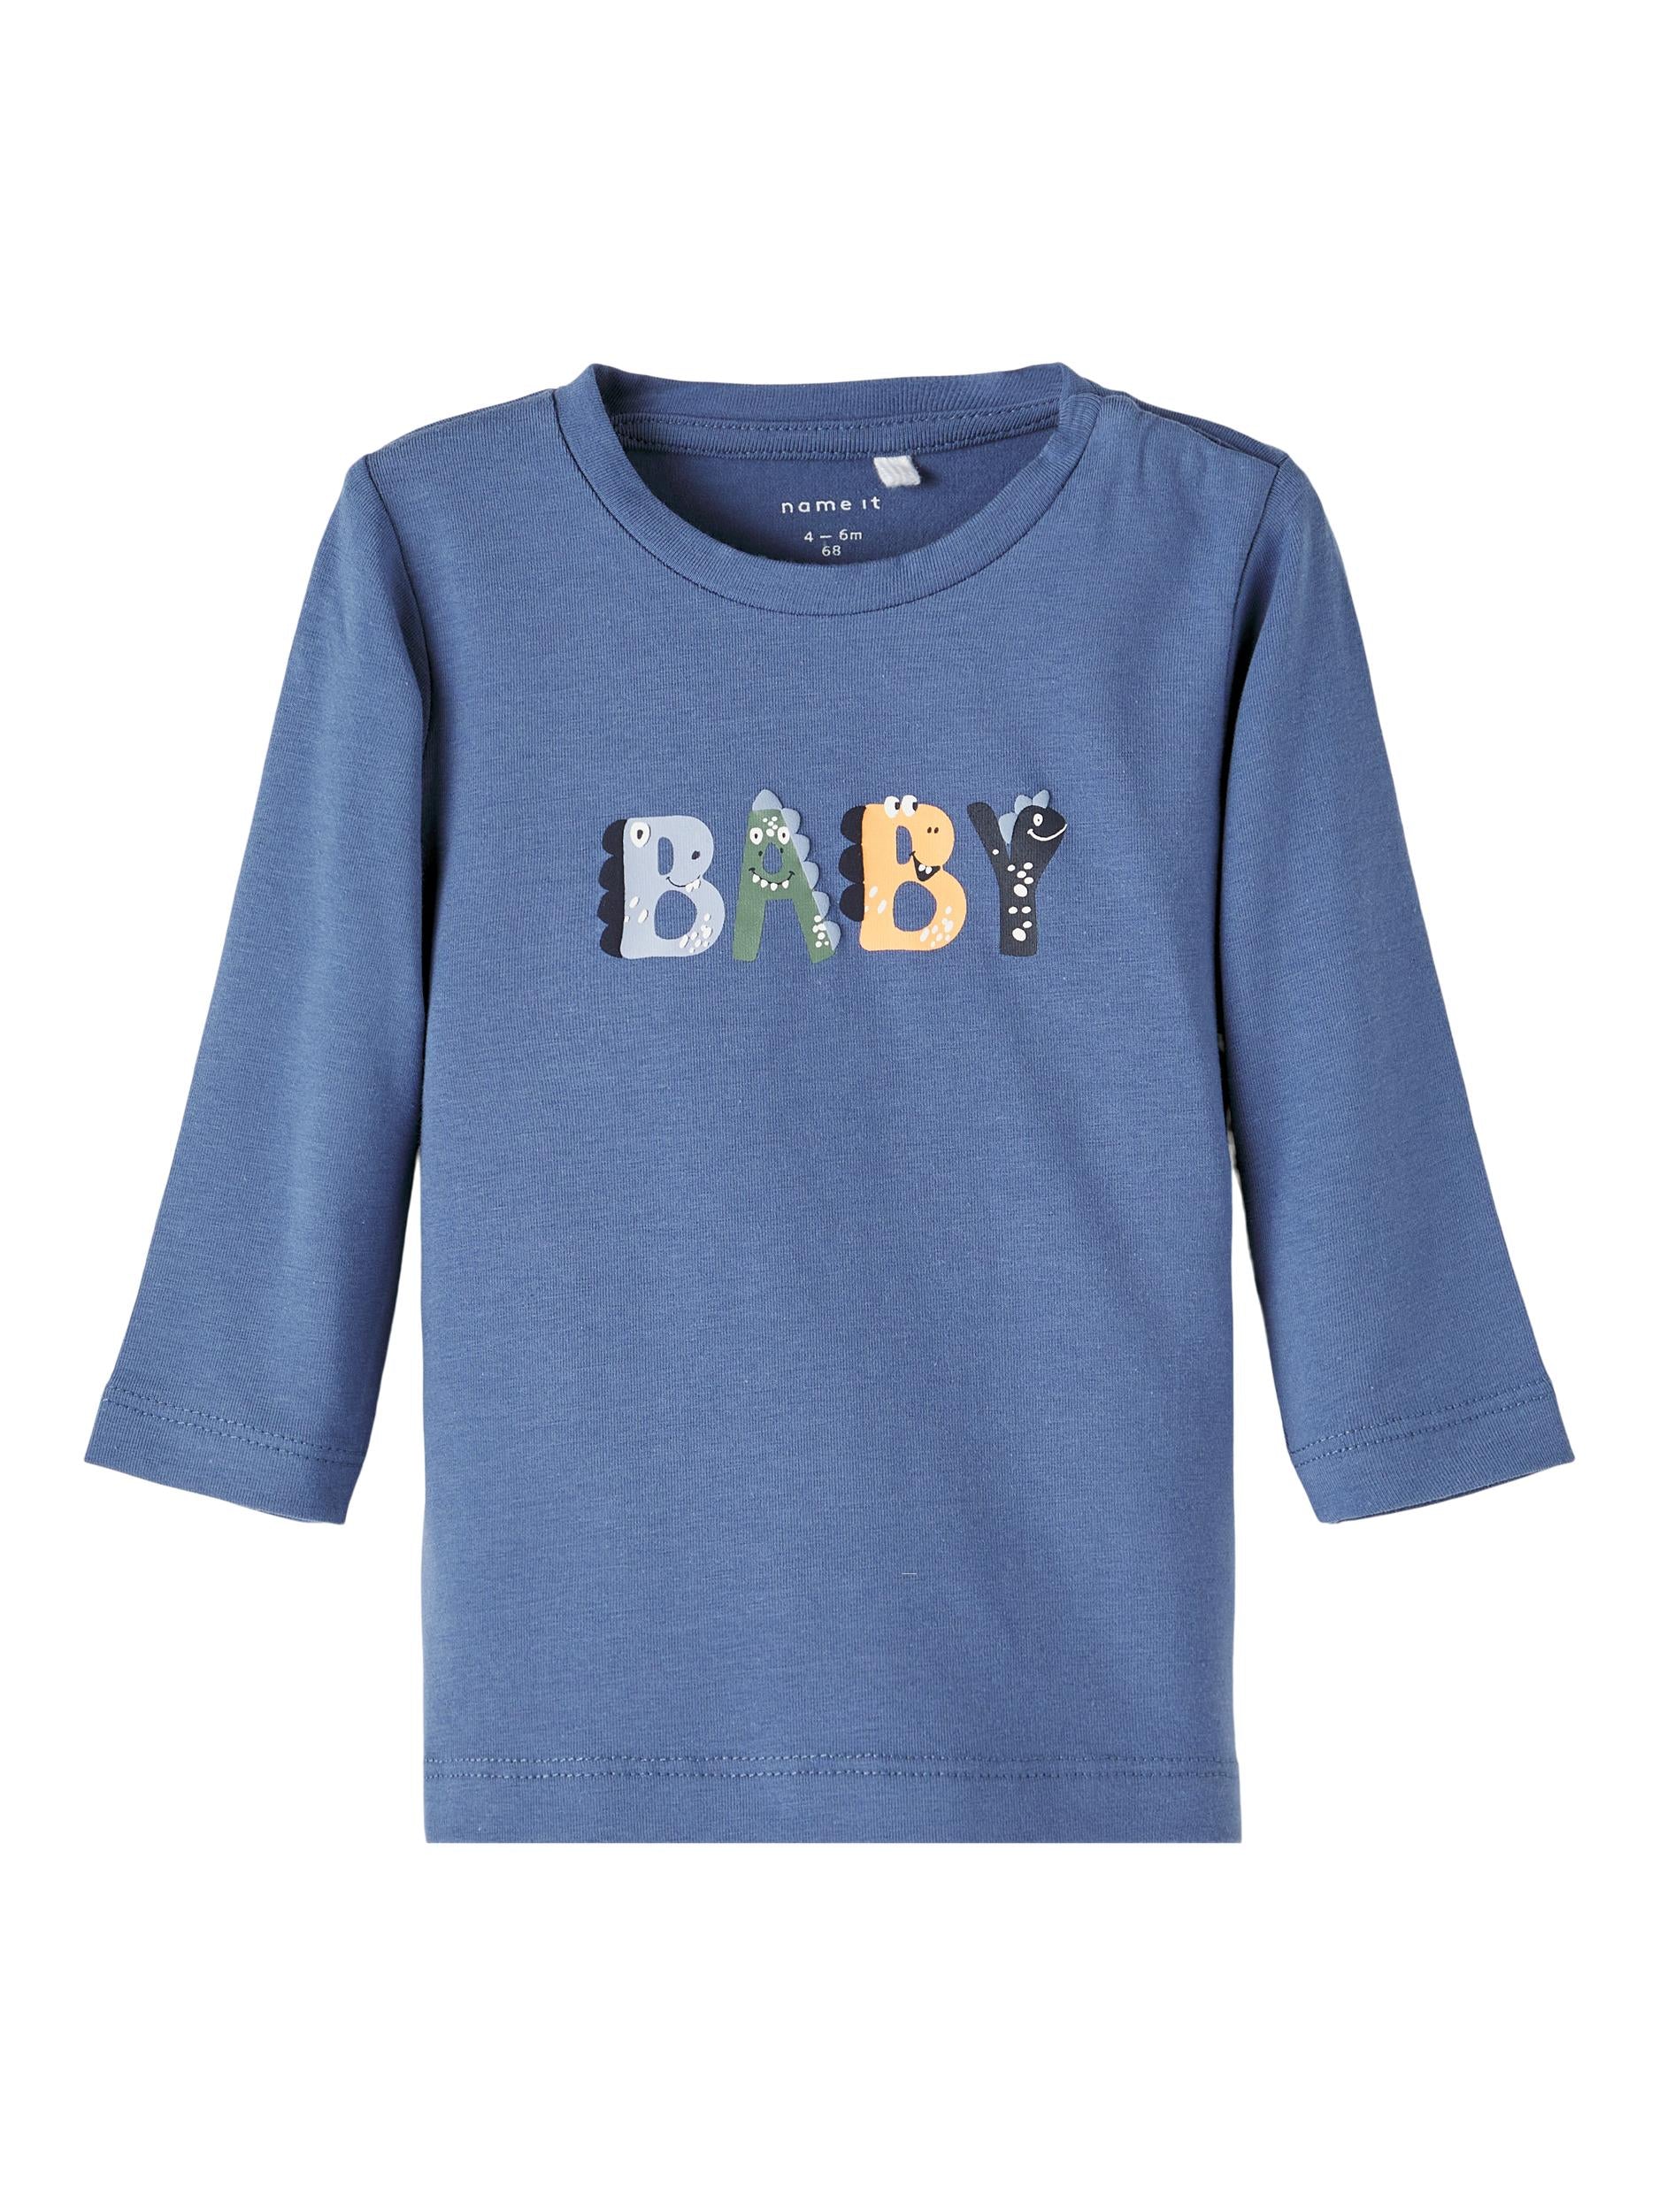 Boy's Blue Ticard Long Sleeve Top-Front View